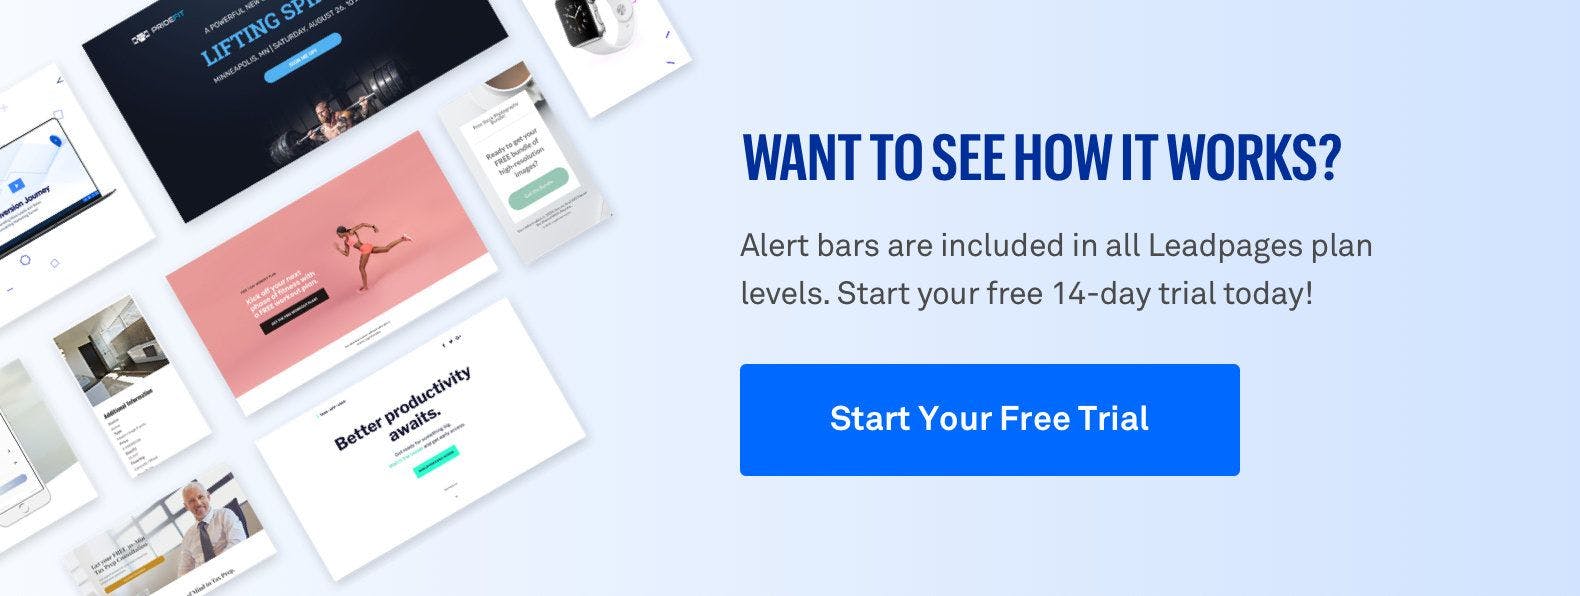 Want to see how it works? Alert bars are included in all Leadpages plan levels. Start your free 14-day trial today!